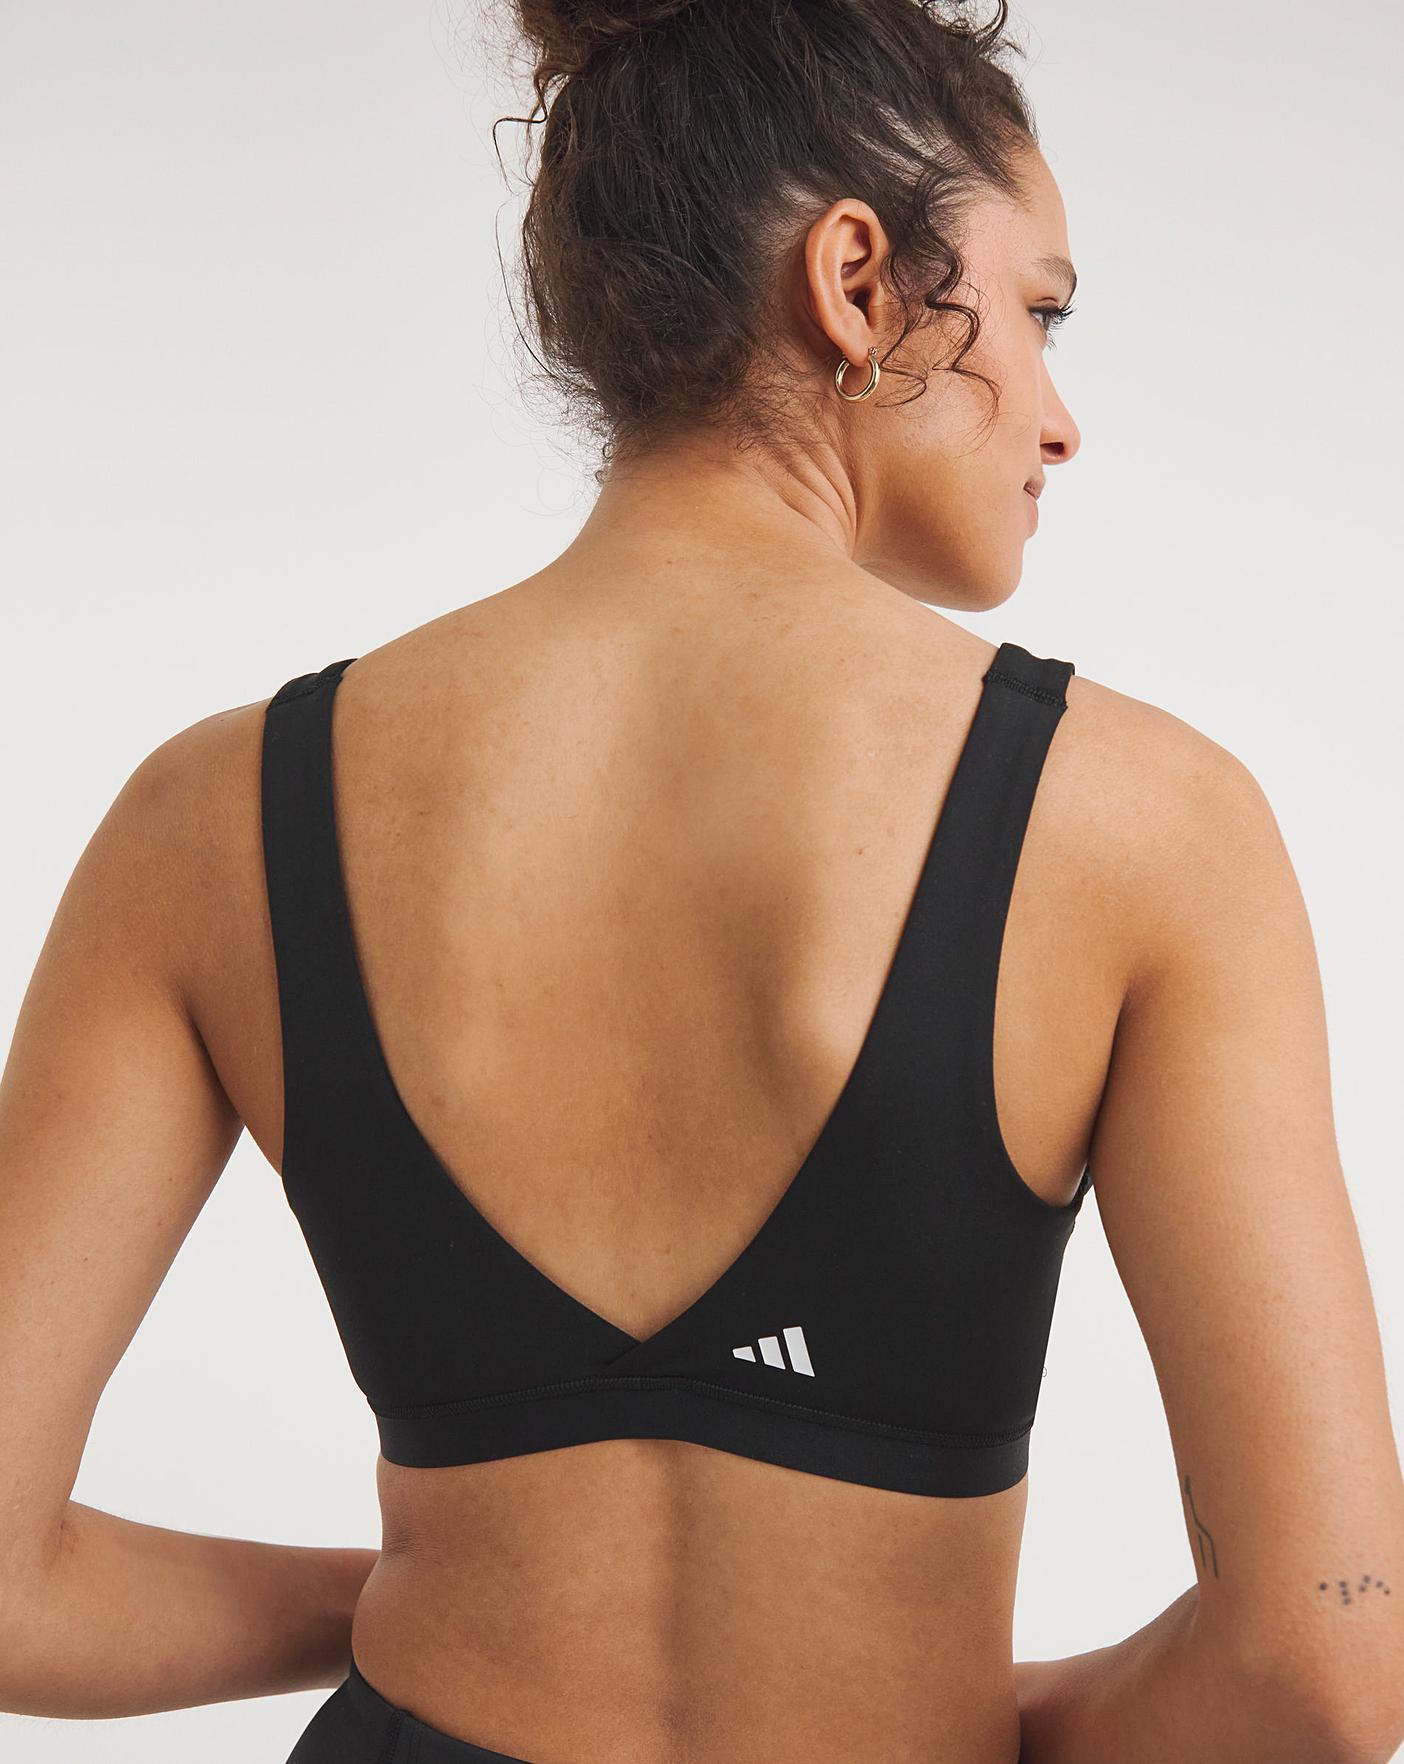 Training bras from 7.99 € - Discounts up to 73%